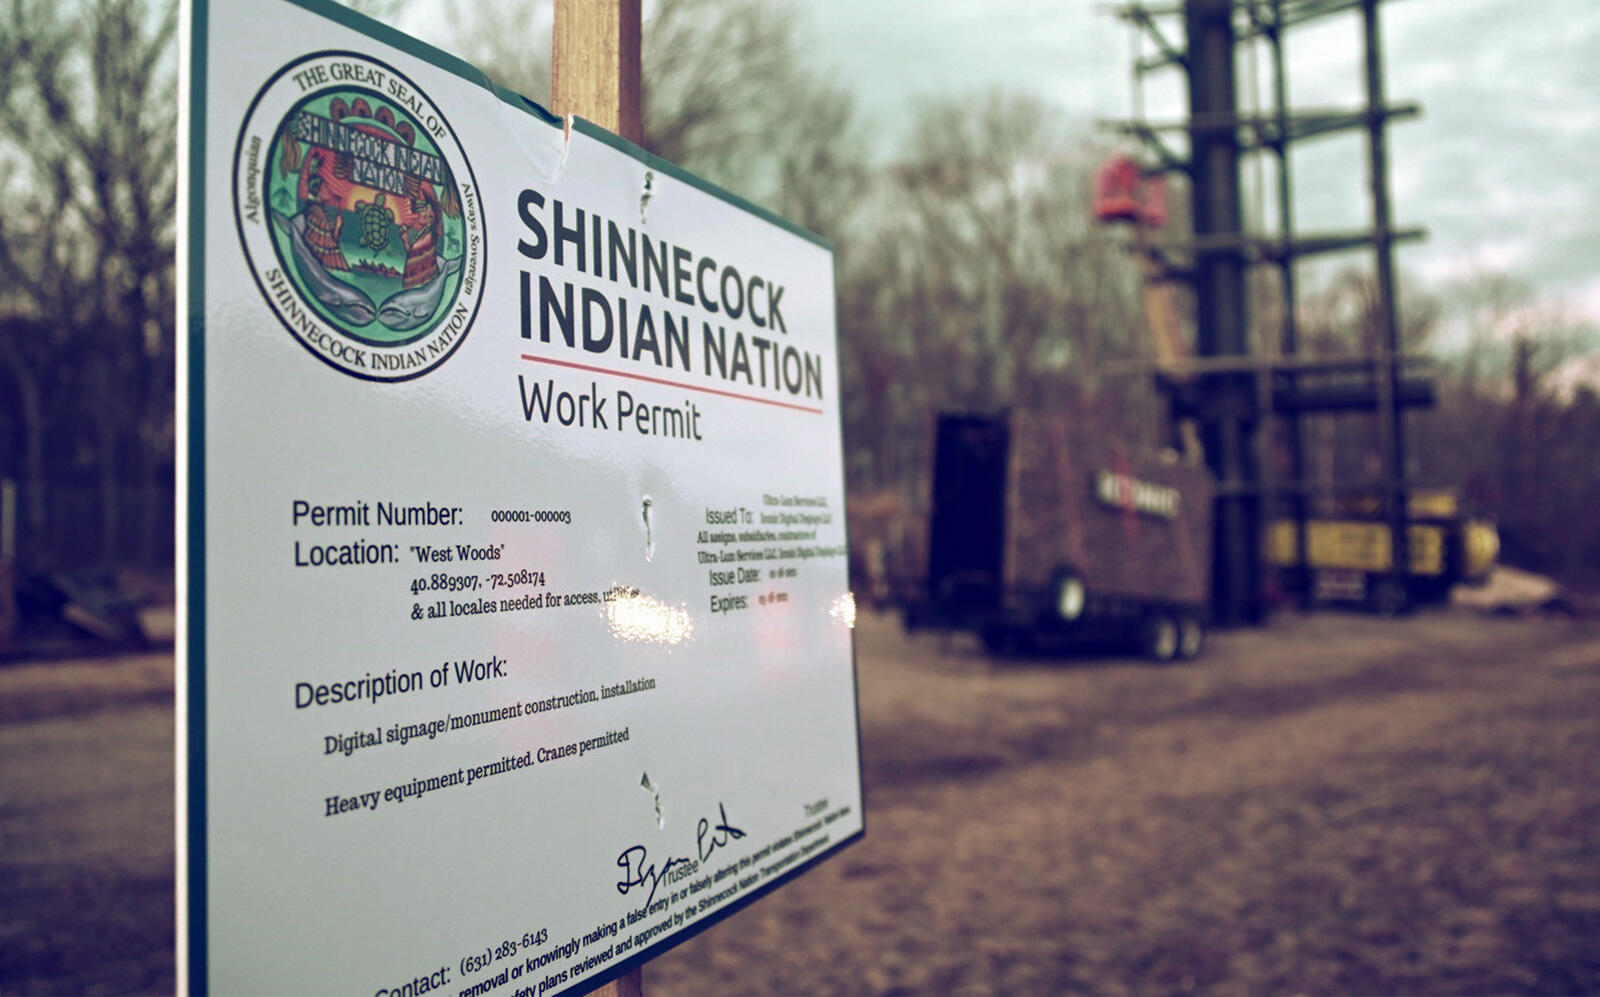 Signage from Shinnecock Indian Nation construction earlier this year (Getty)